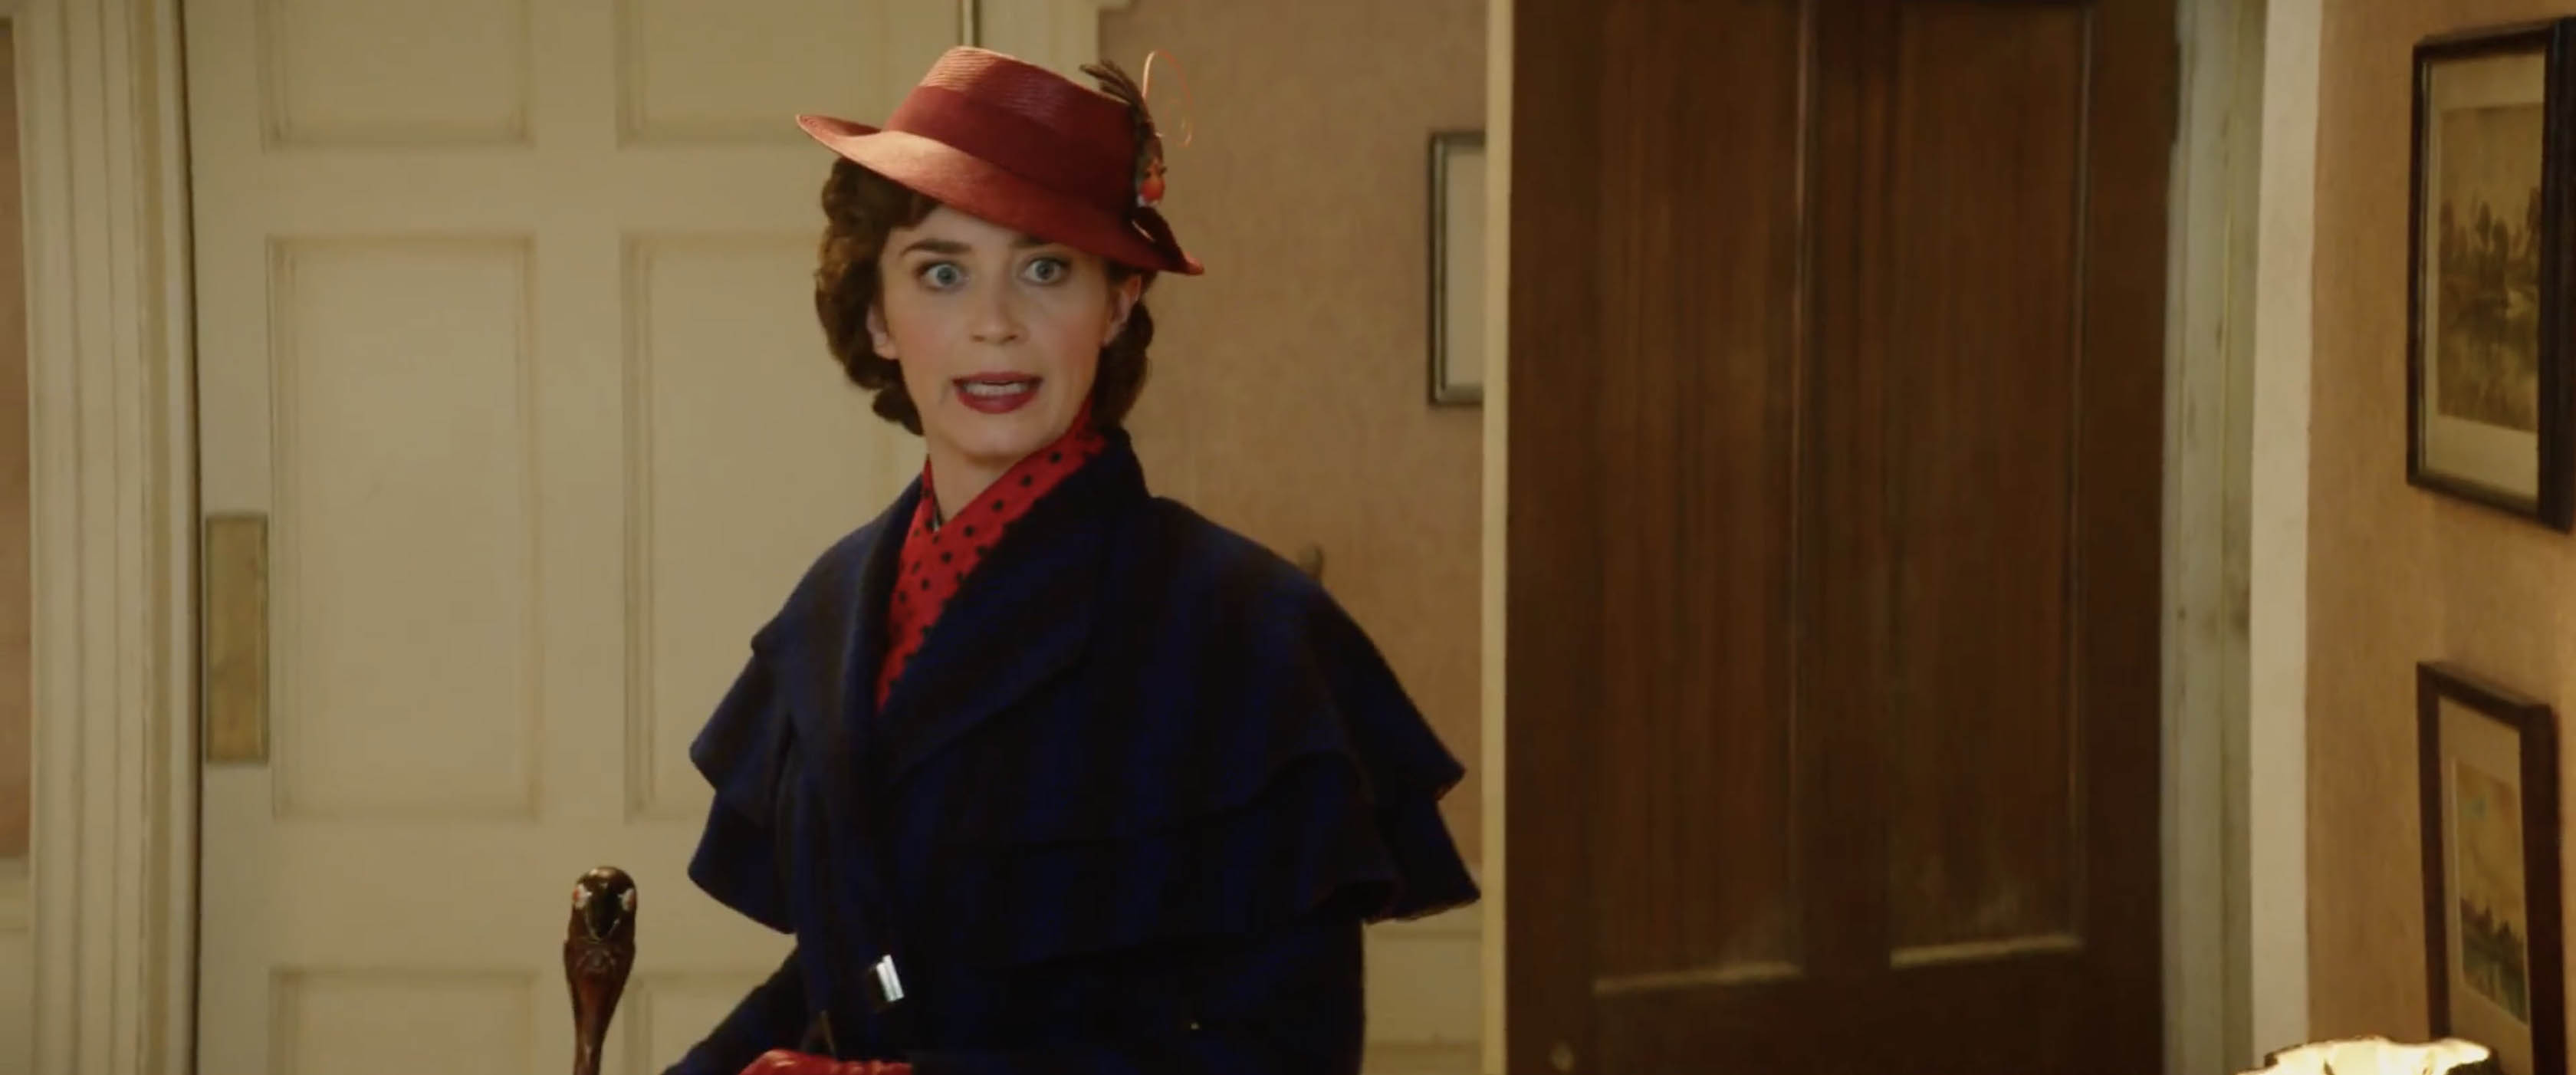 Mary Poppins Returns Trailer Will Give You All the Feels | The Nerdy